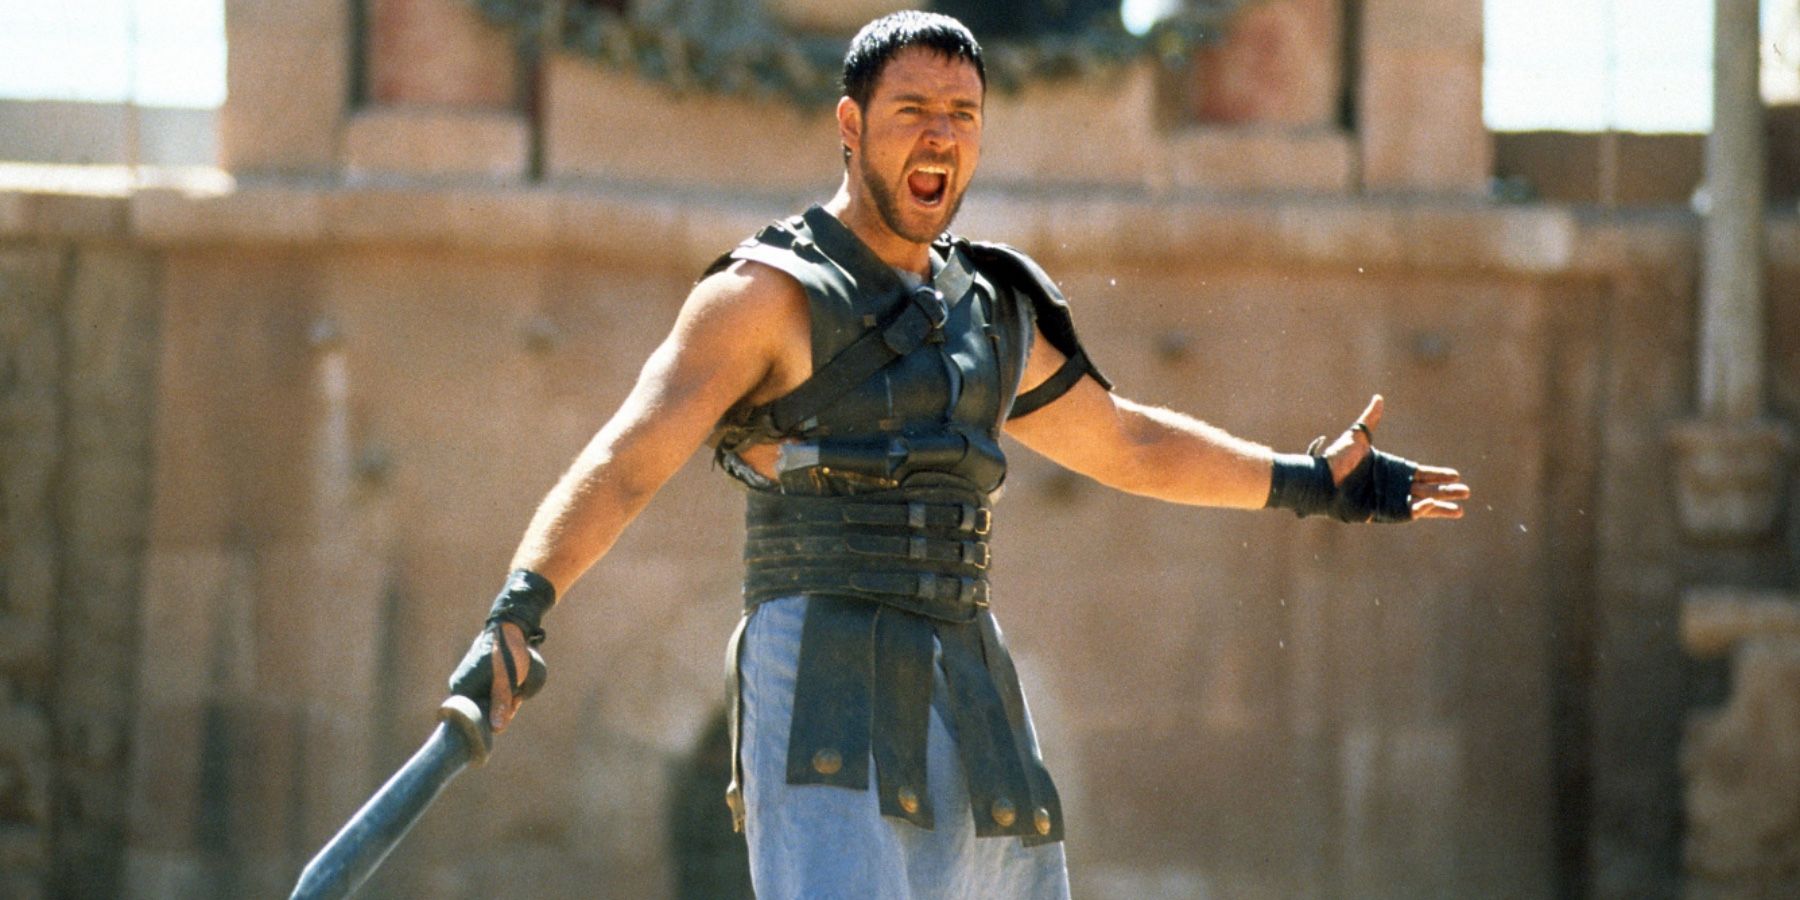 russell-crowe-with-sword-in-a-scene-from-the-film-gladiator